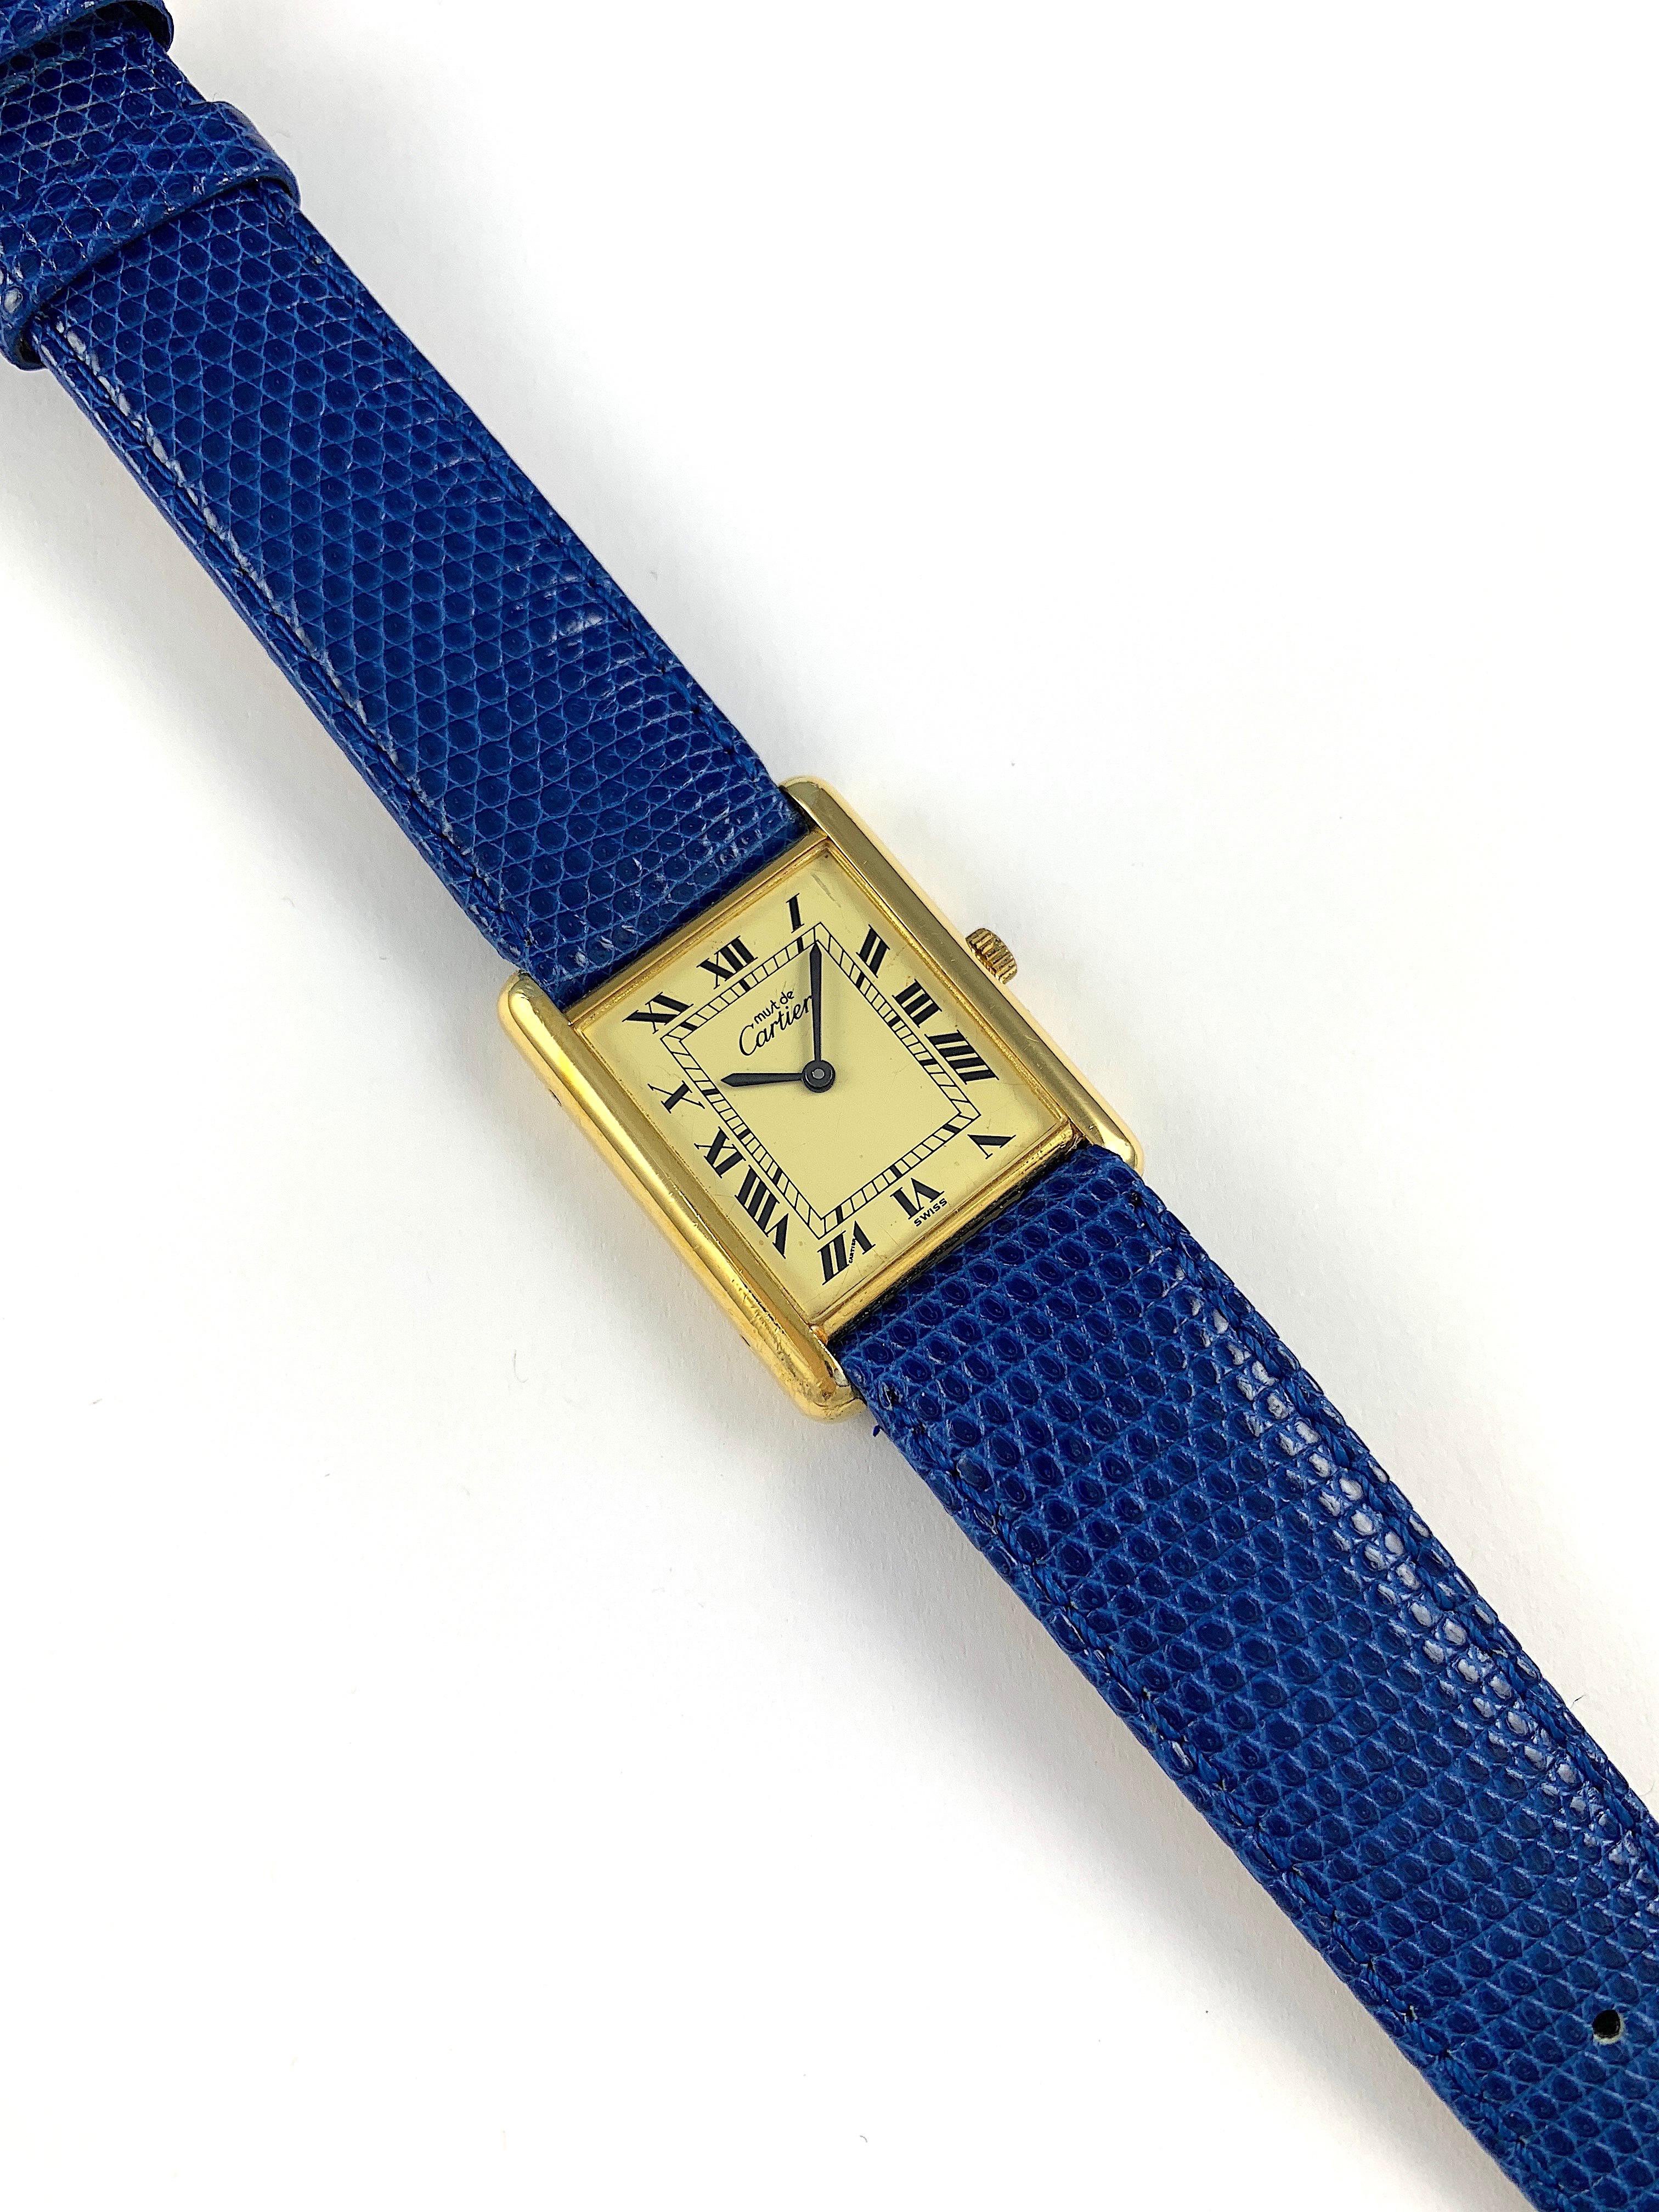 Must De Cartier Manual Wind Gold Plated Tank Watch
Champagne Dial with Black Roman Numerals and Matching Black Hands
Manual Wind Movement
Cartier Paris Must Argent Base Gold Electroplating
Signed and Engraved Case-Back
Generic Gold Toned Crown
Blue